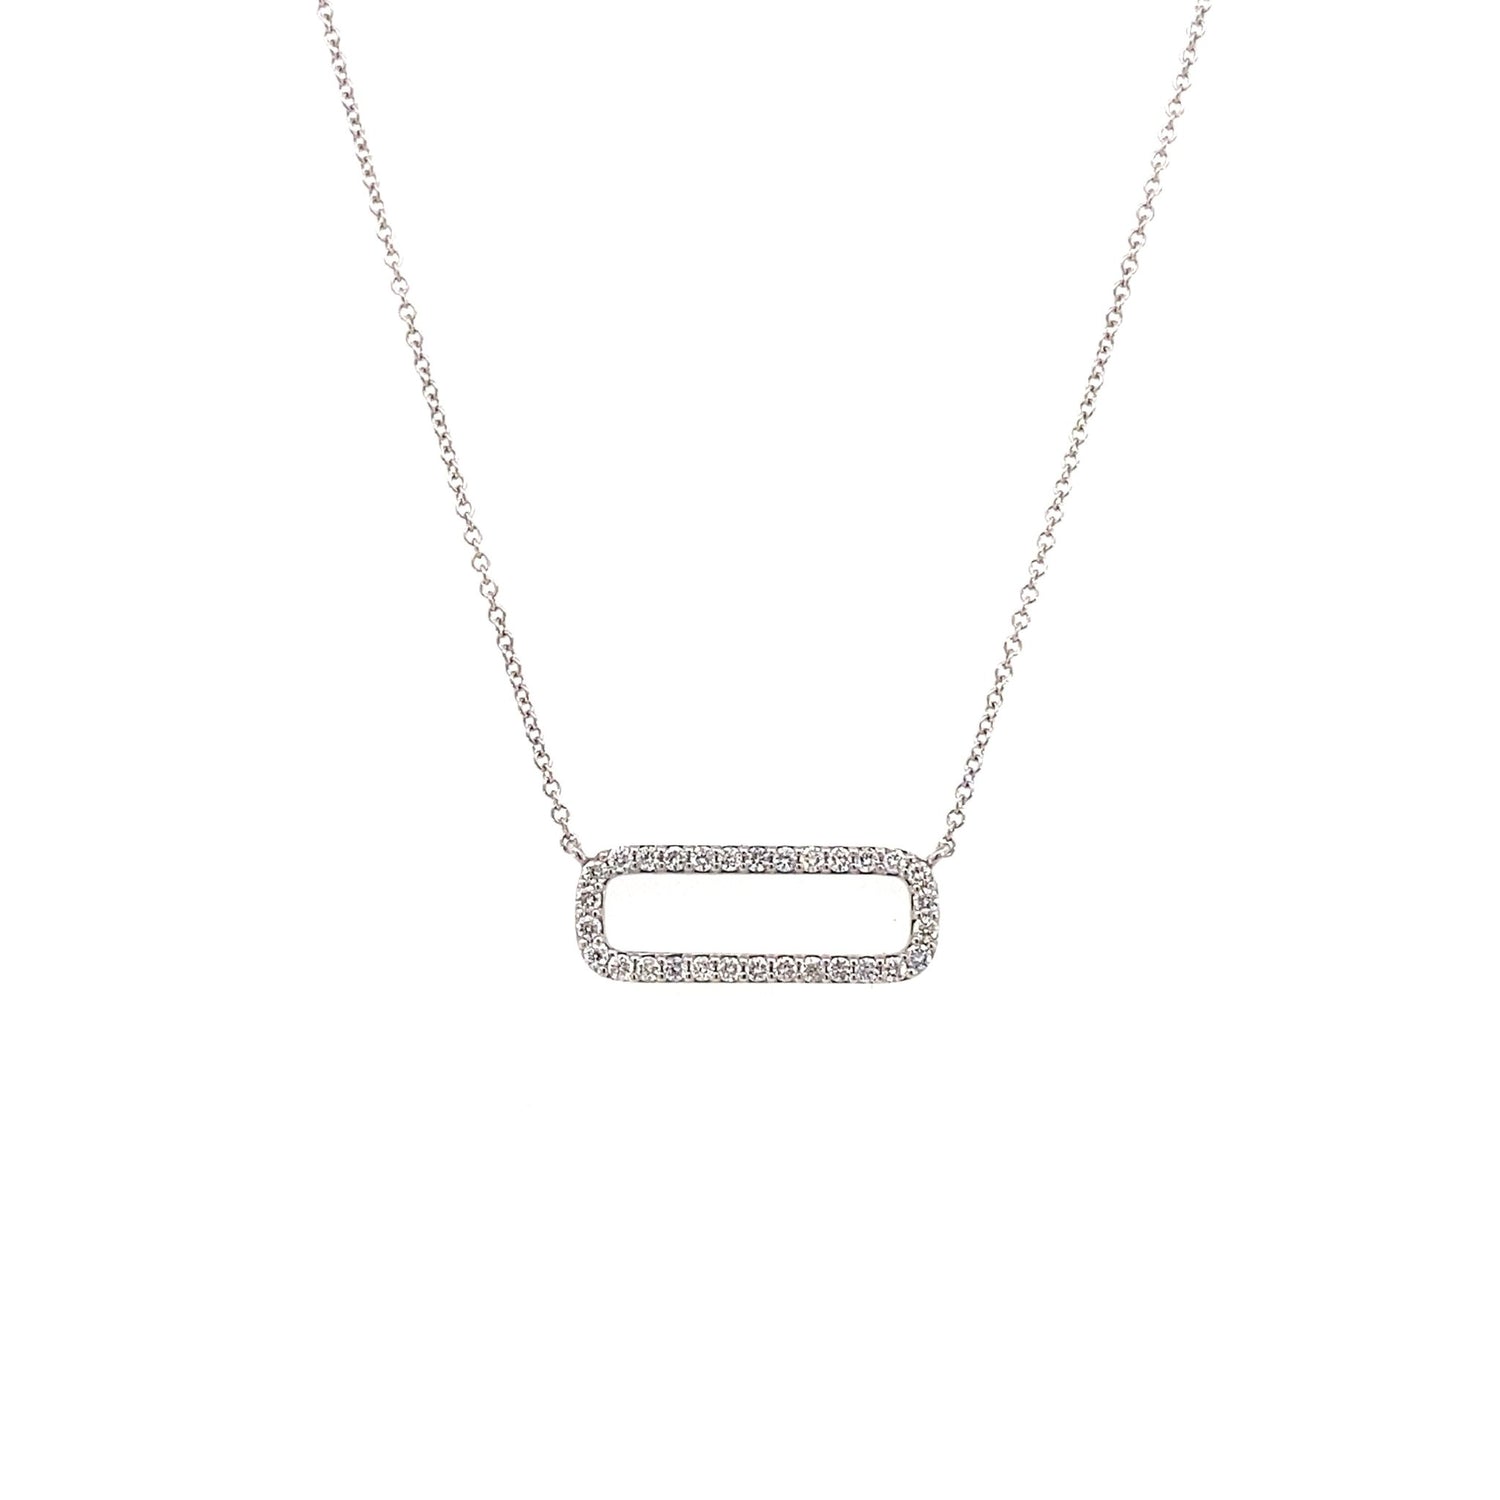 Necklace diamond rectangle 30=.30ct 14kt white gold - Gaines Jewelers